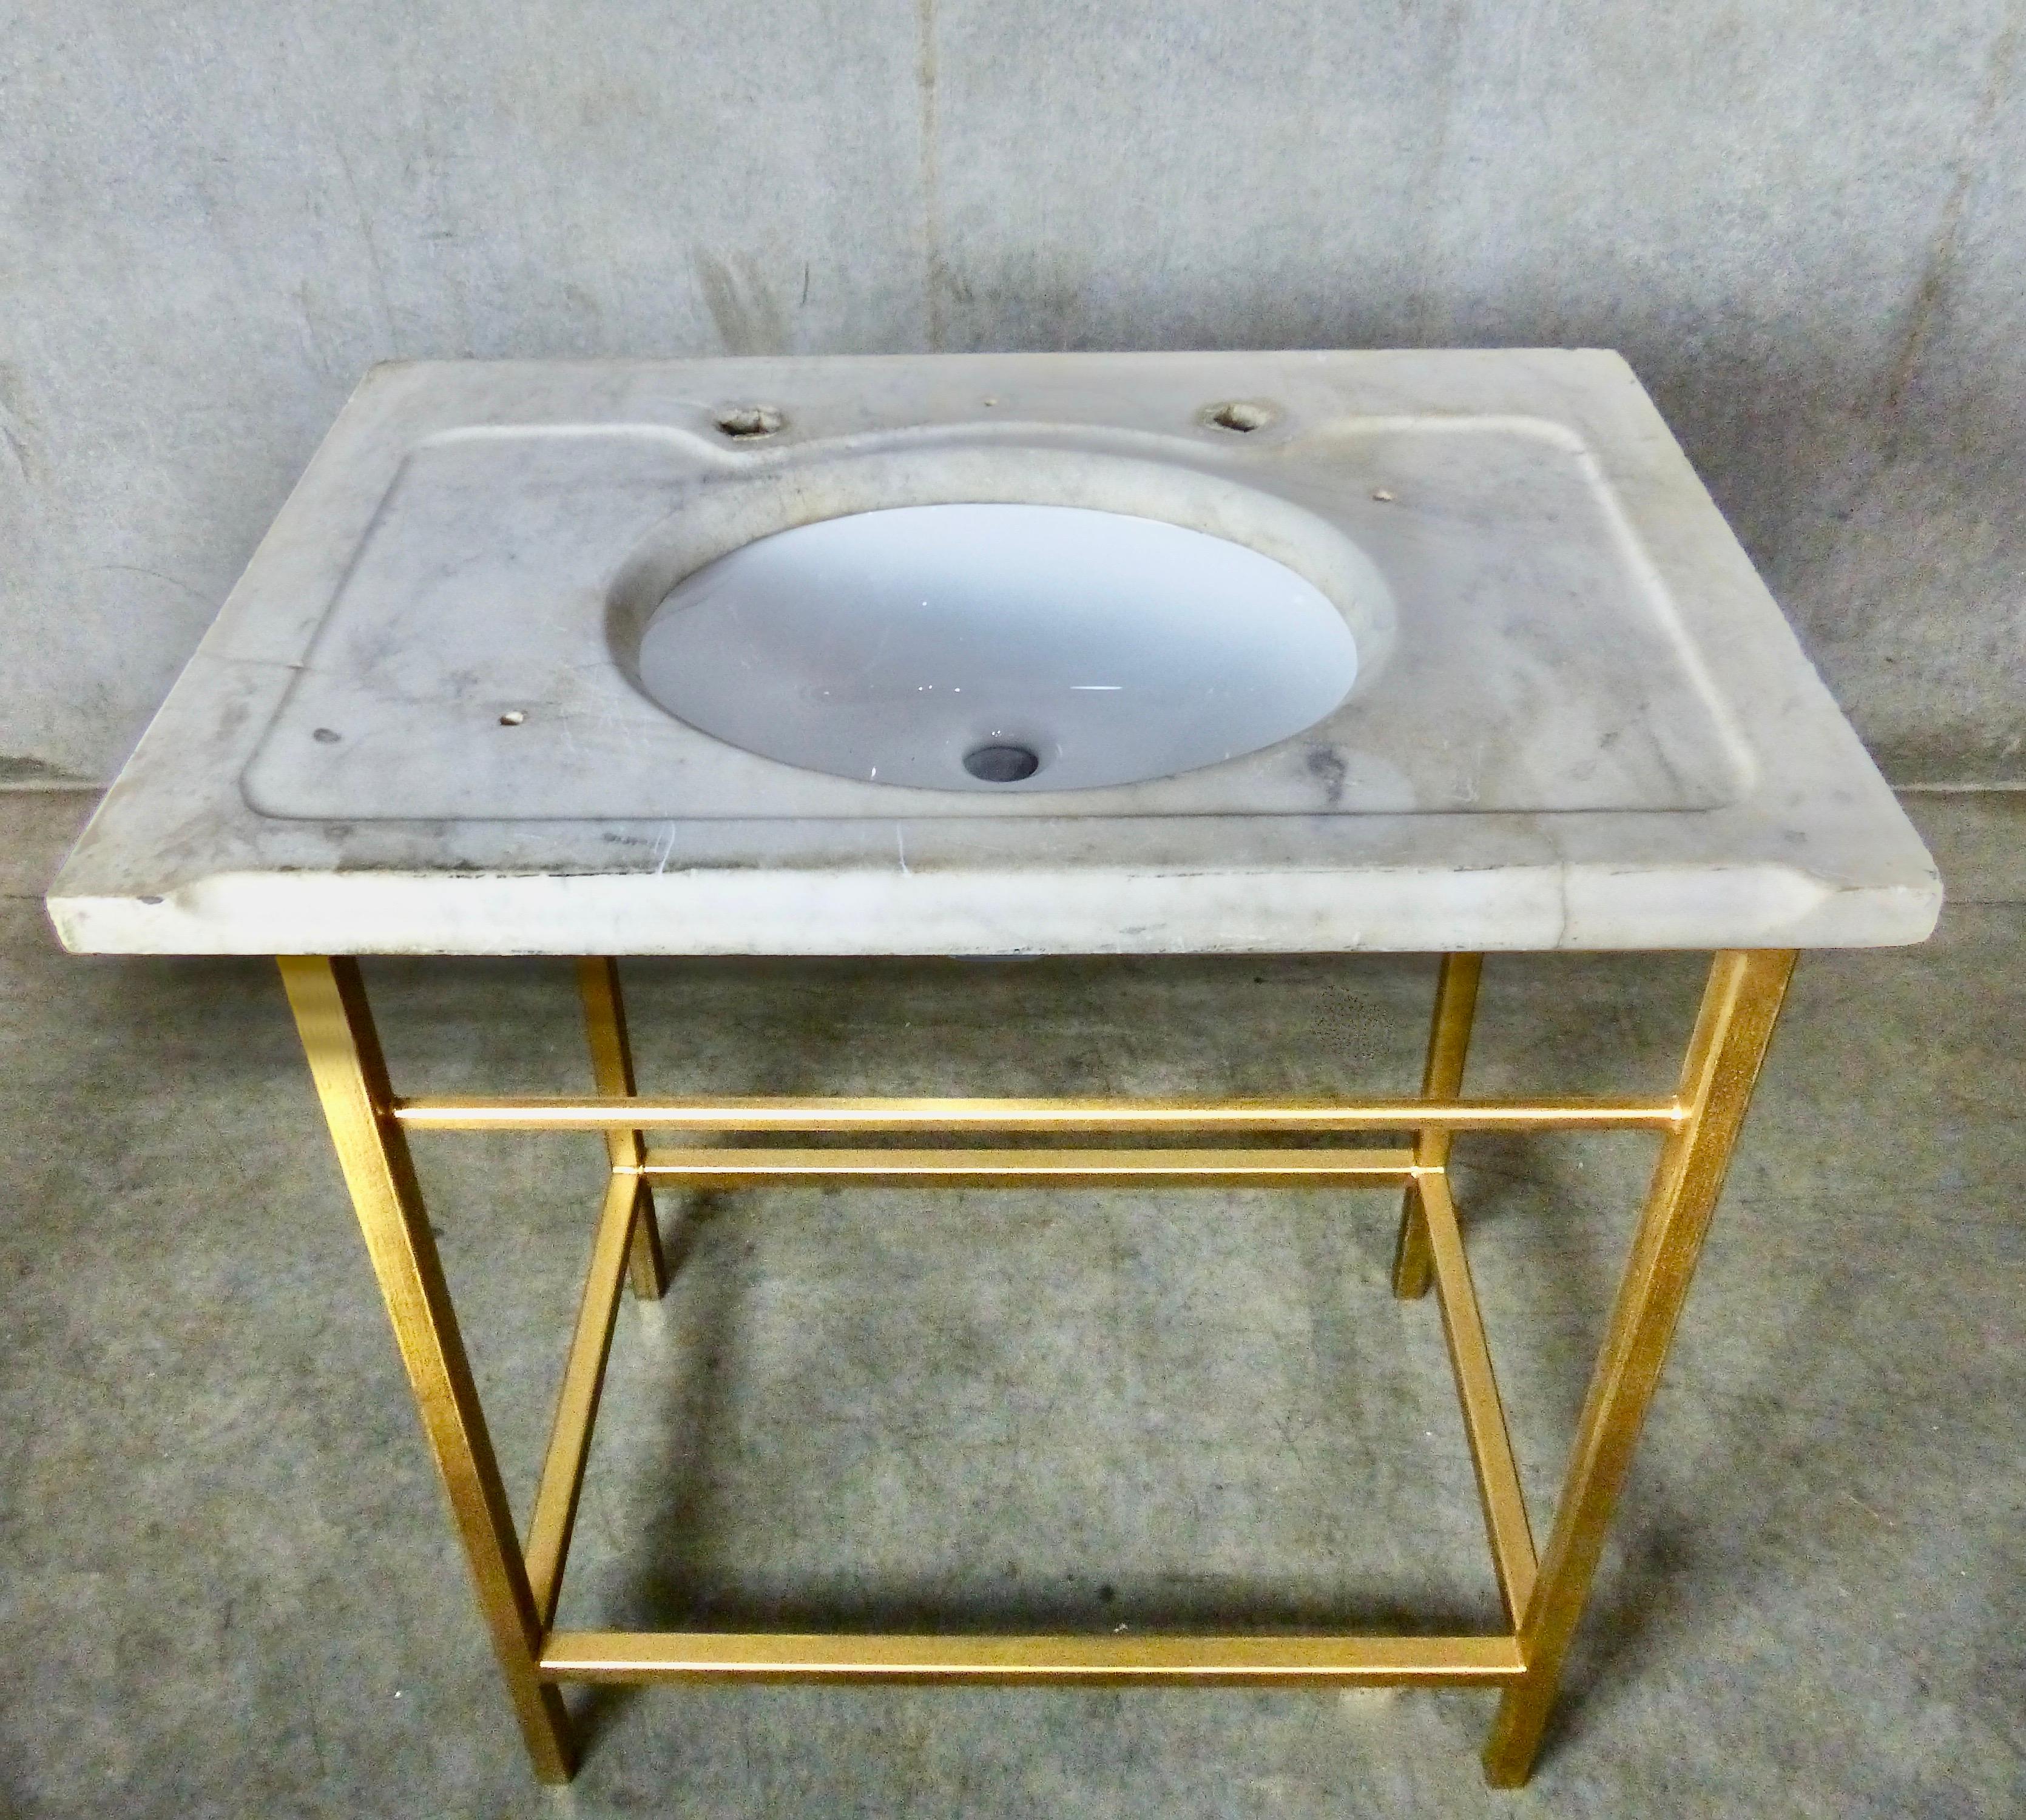 This beautiful old marble vanity counter top has been outfitted with a bespoke steel frame — with brass finish — and a new porcelain sink. 
Great Hollywood Regency style!
Dimensions 34.5H” x 30W” x 20D”.